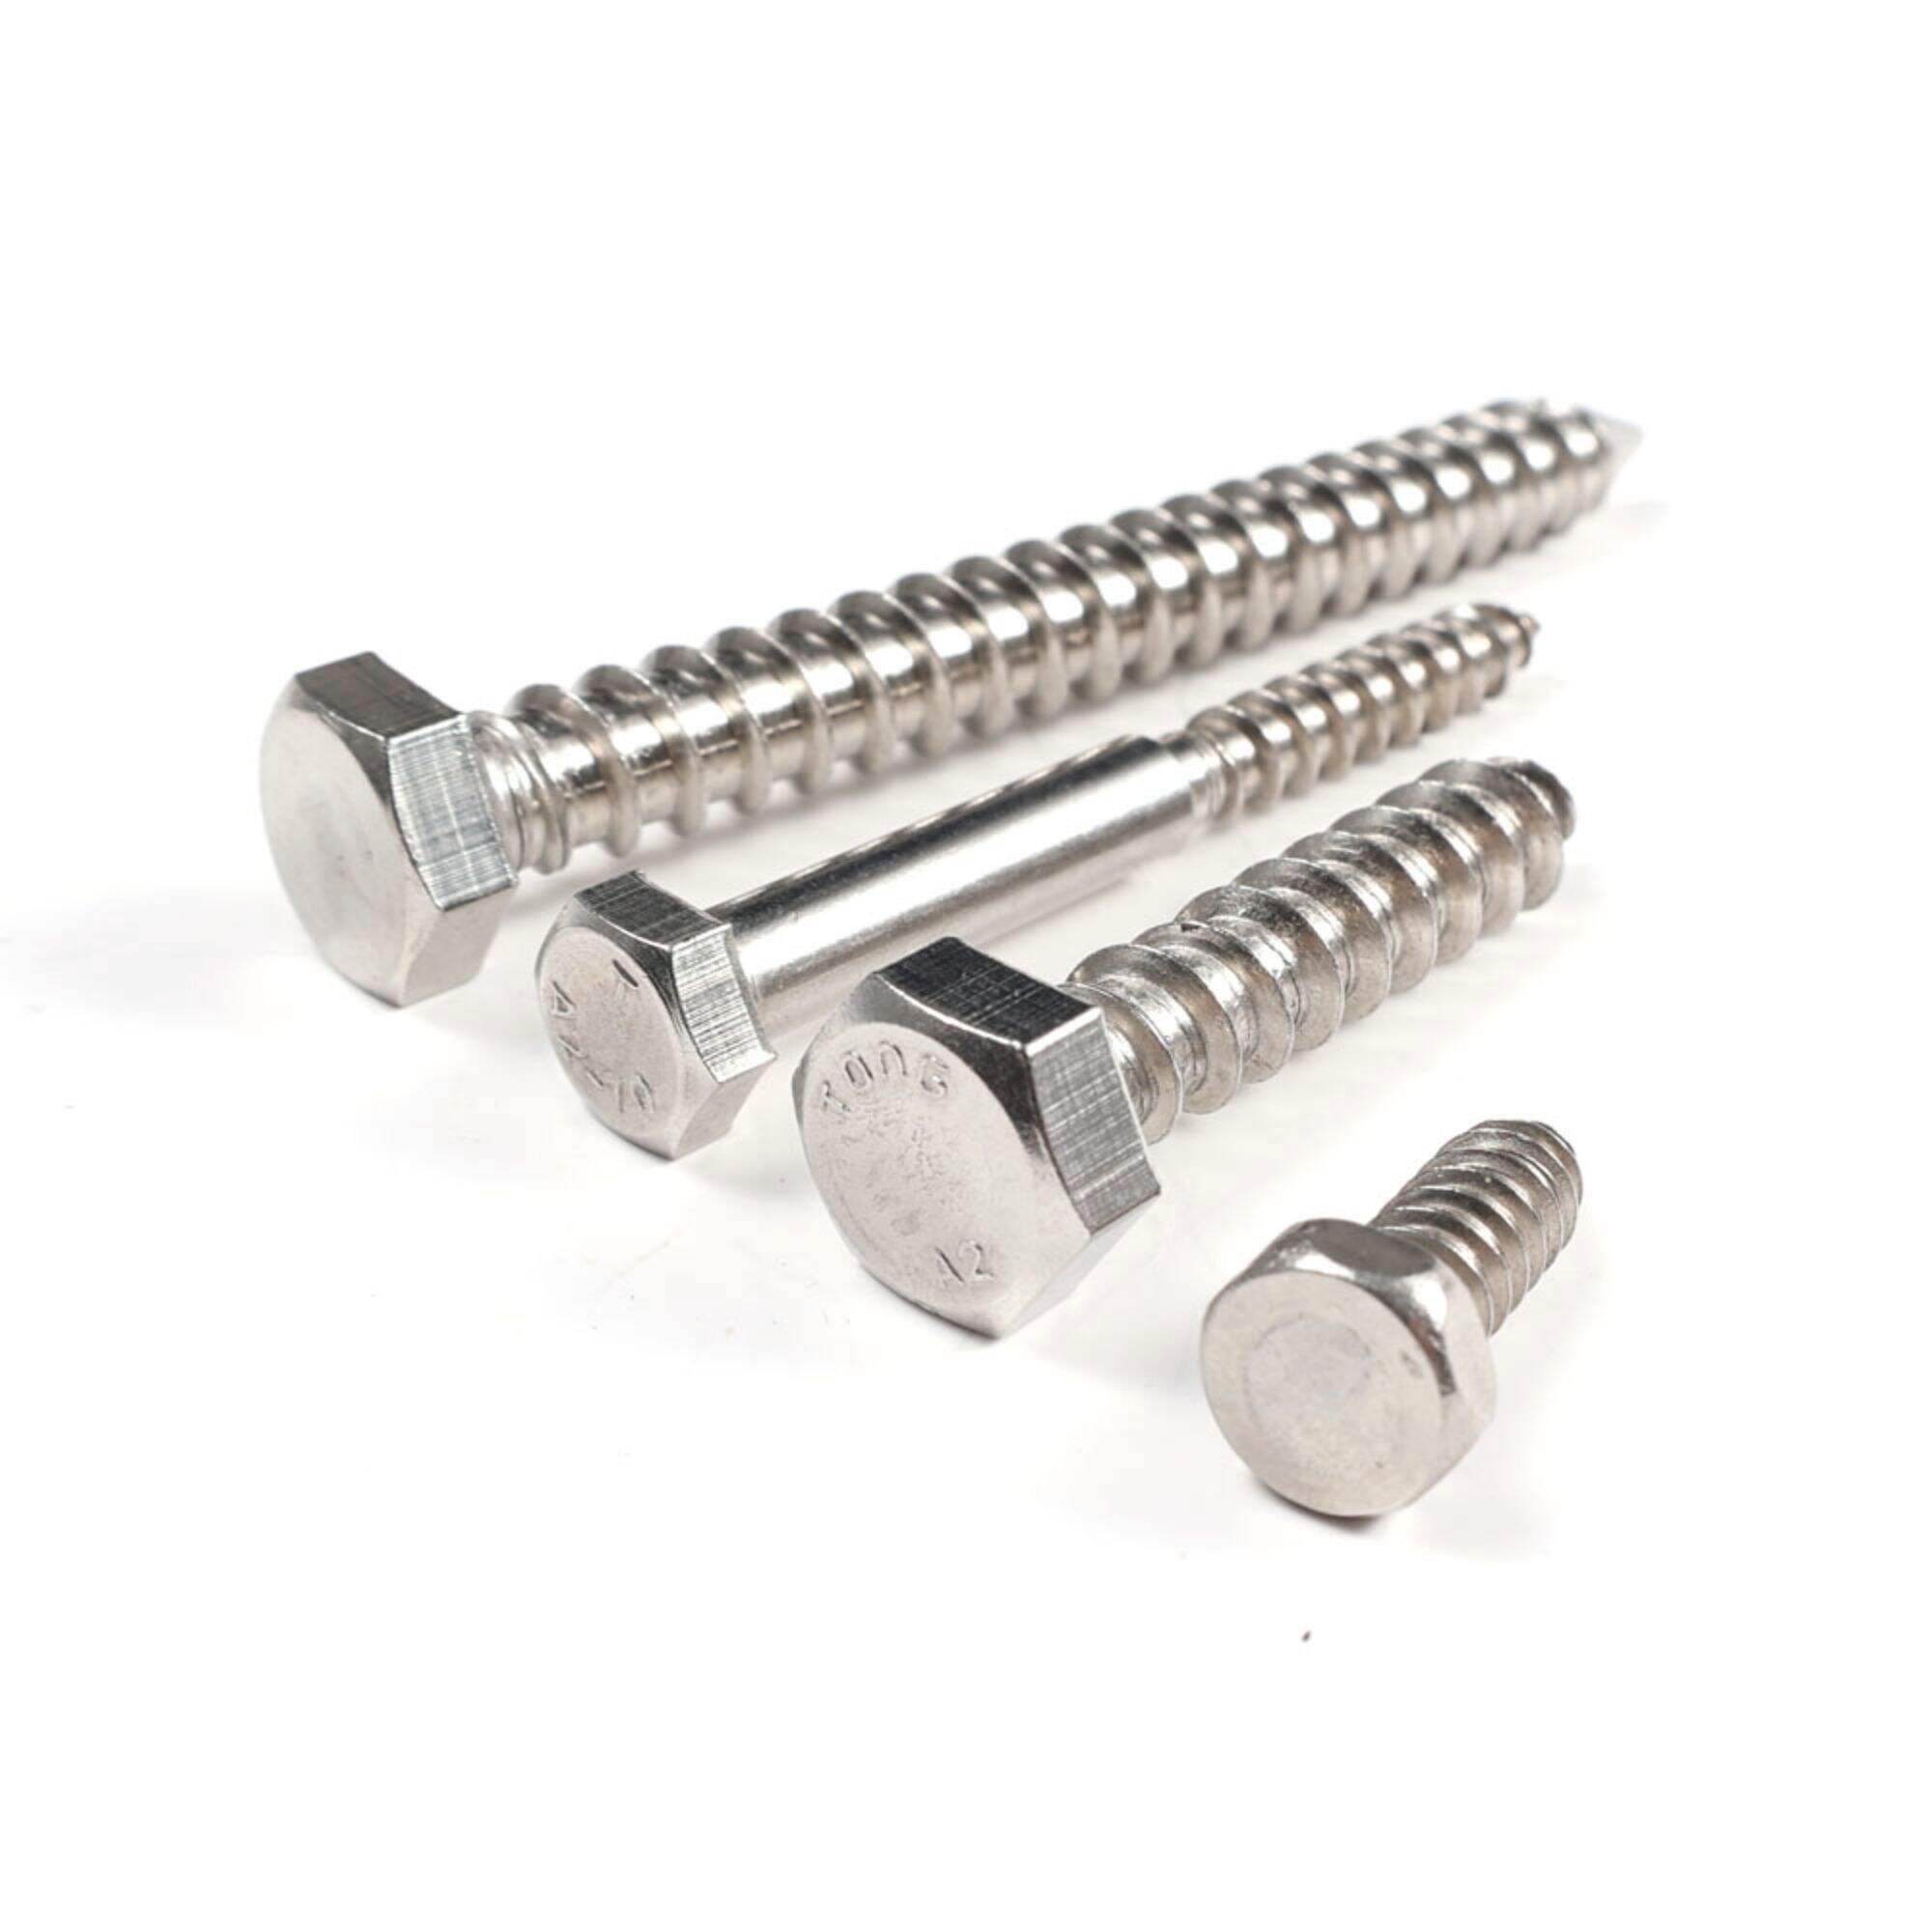 DIN571 Hexagon Hex Head Coach Lag Screw Bolt Self Tapping Wood Screw Stainless Steel